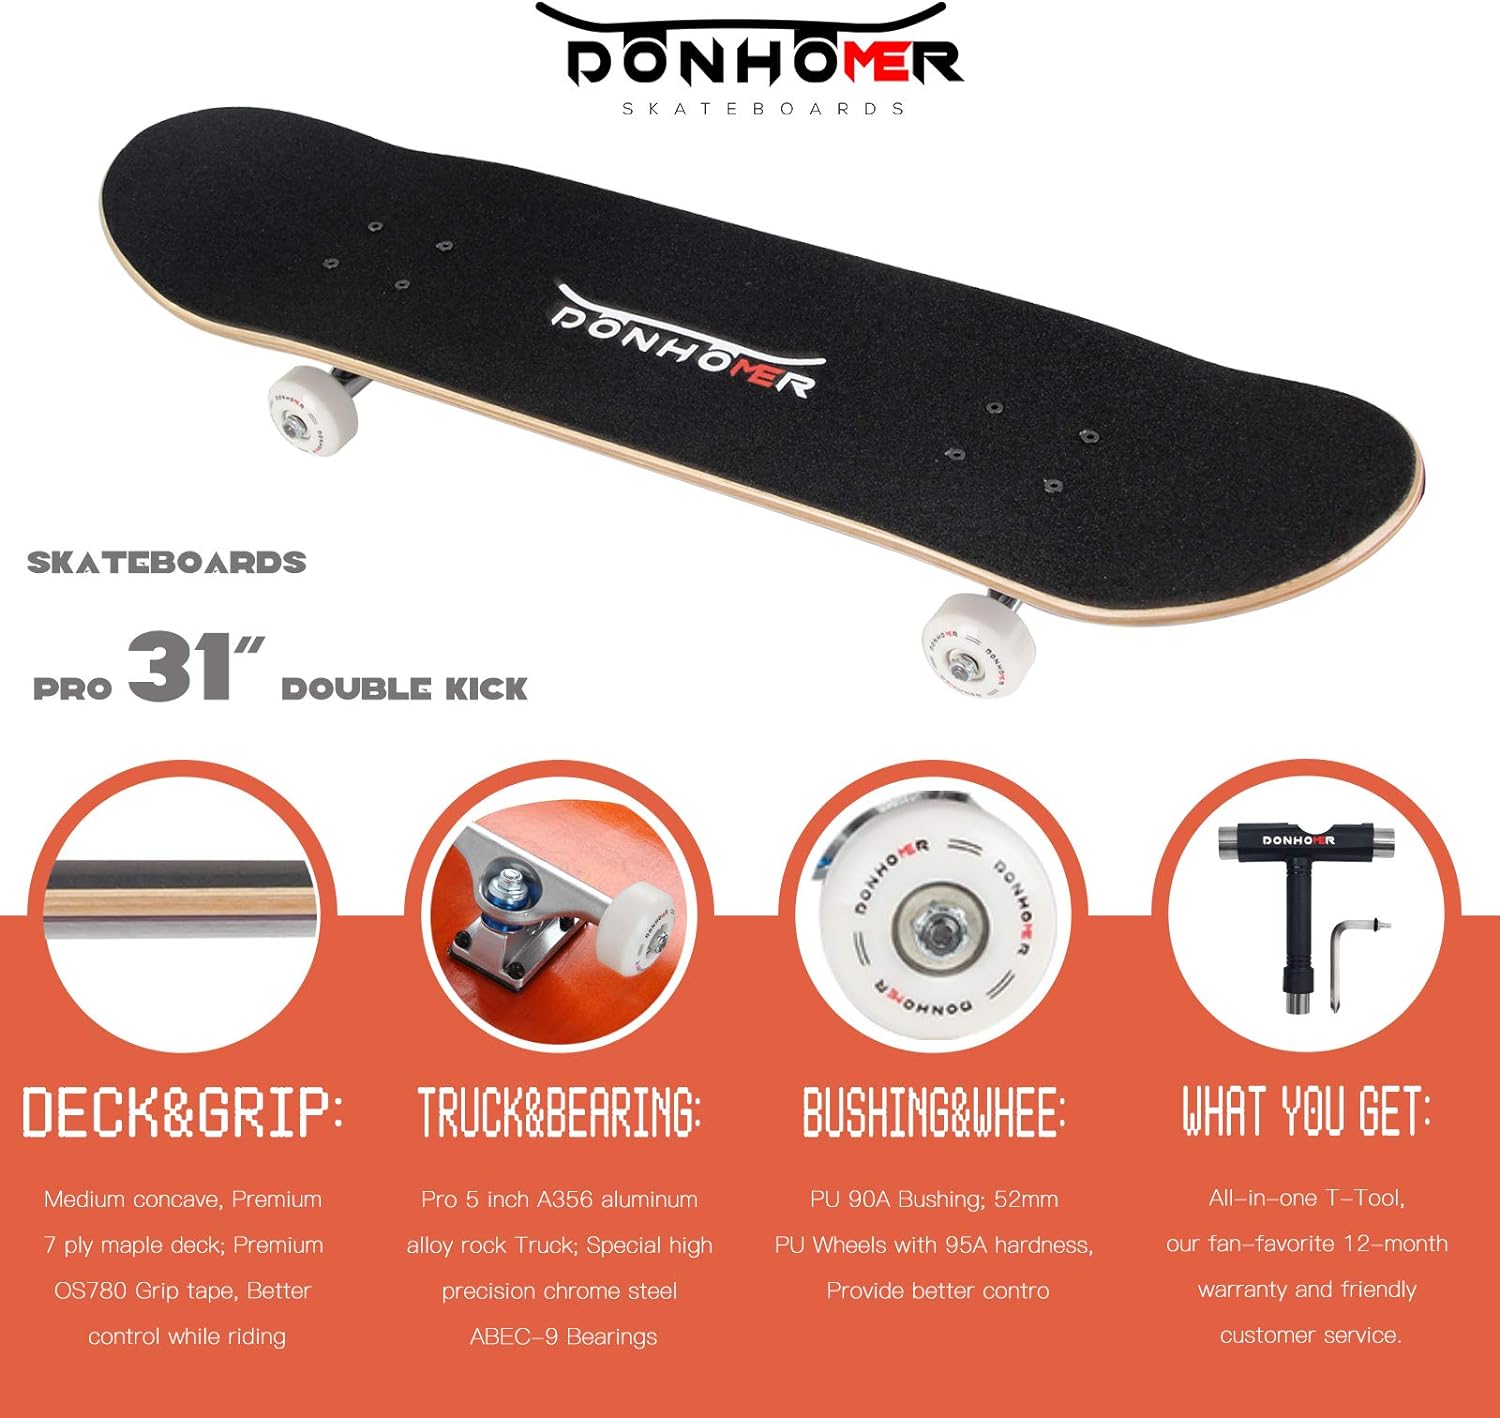 DONHOMER Skateboards - 31x7.75 Pro Skateboard for Adults/Kids Girls/Boys with T-Tool 【Pro 7ply Maple Deck ABEC9】 (Brown02)